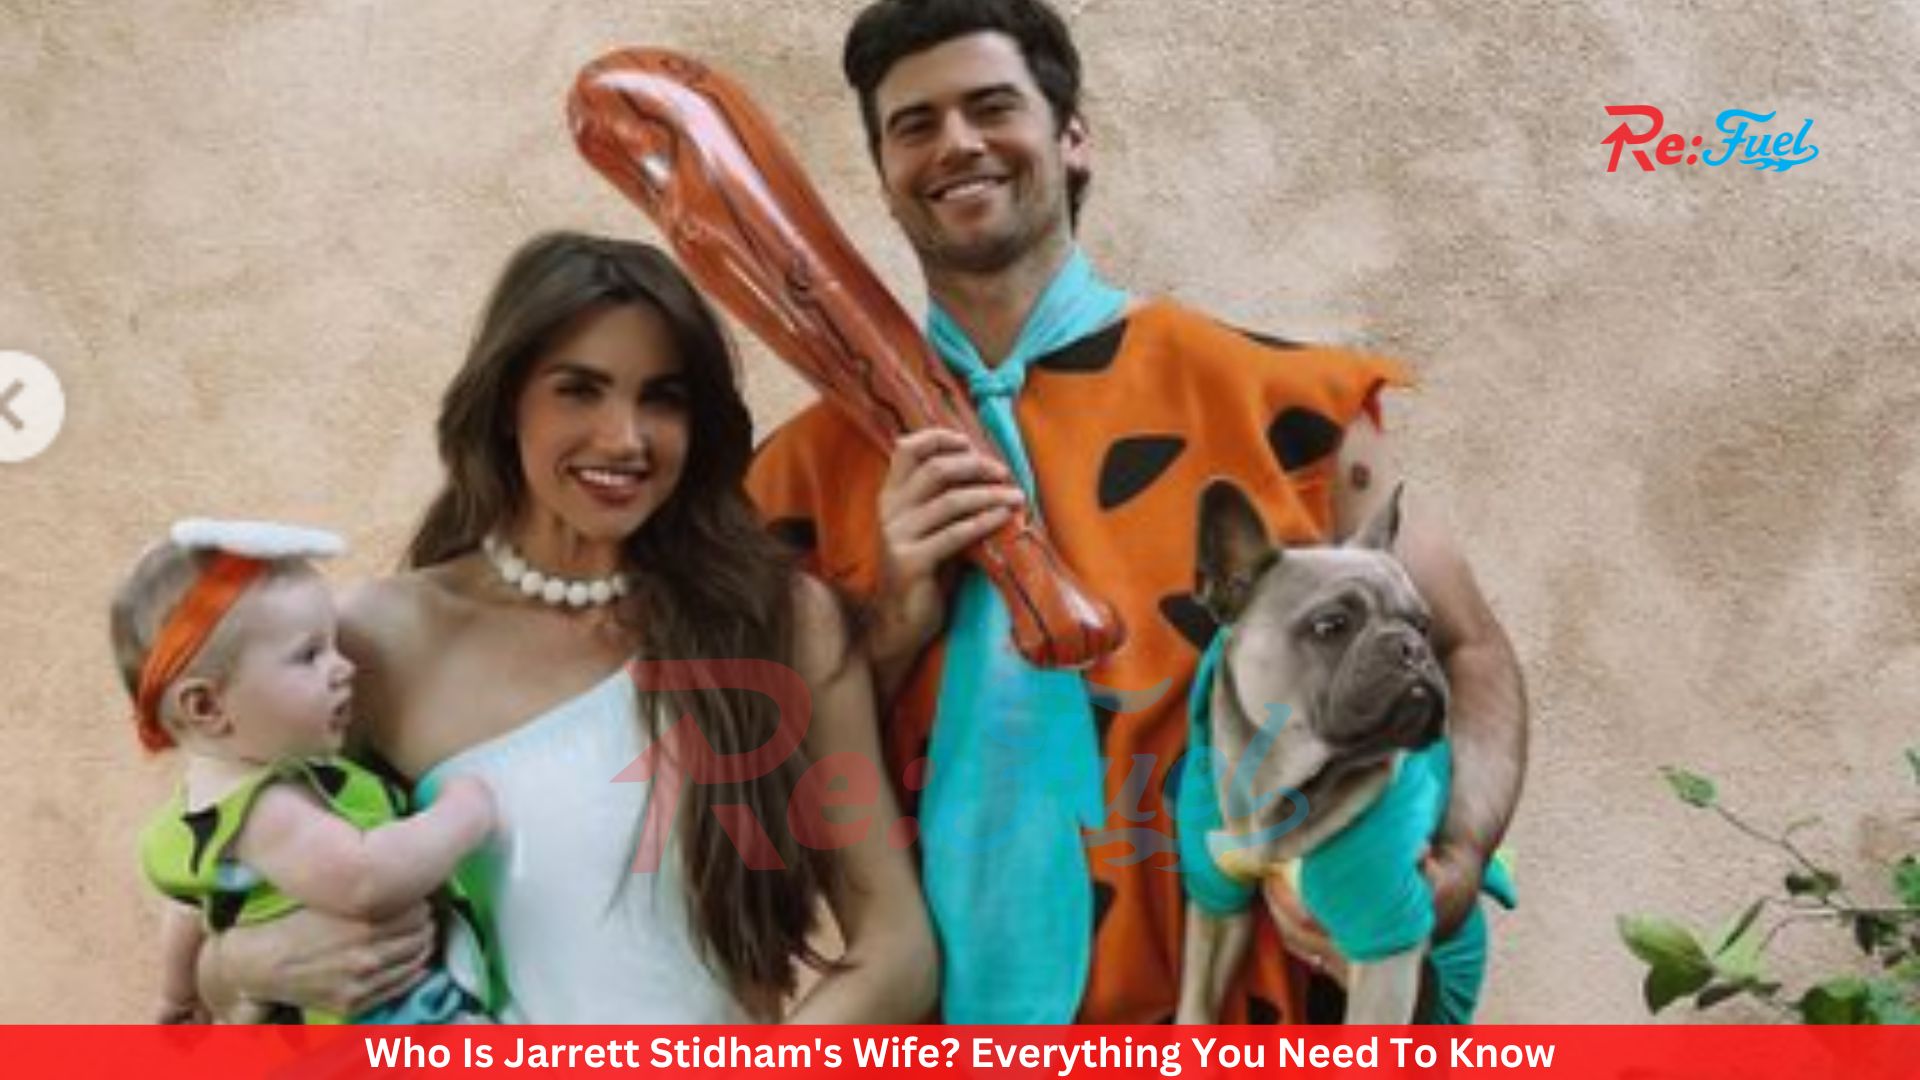 Who Is Jarrett Stidham's Wife? Everything You Need To Know